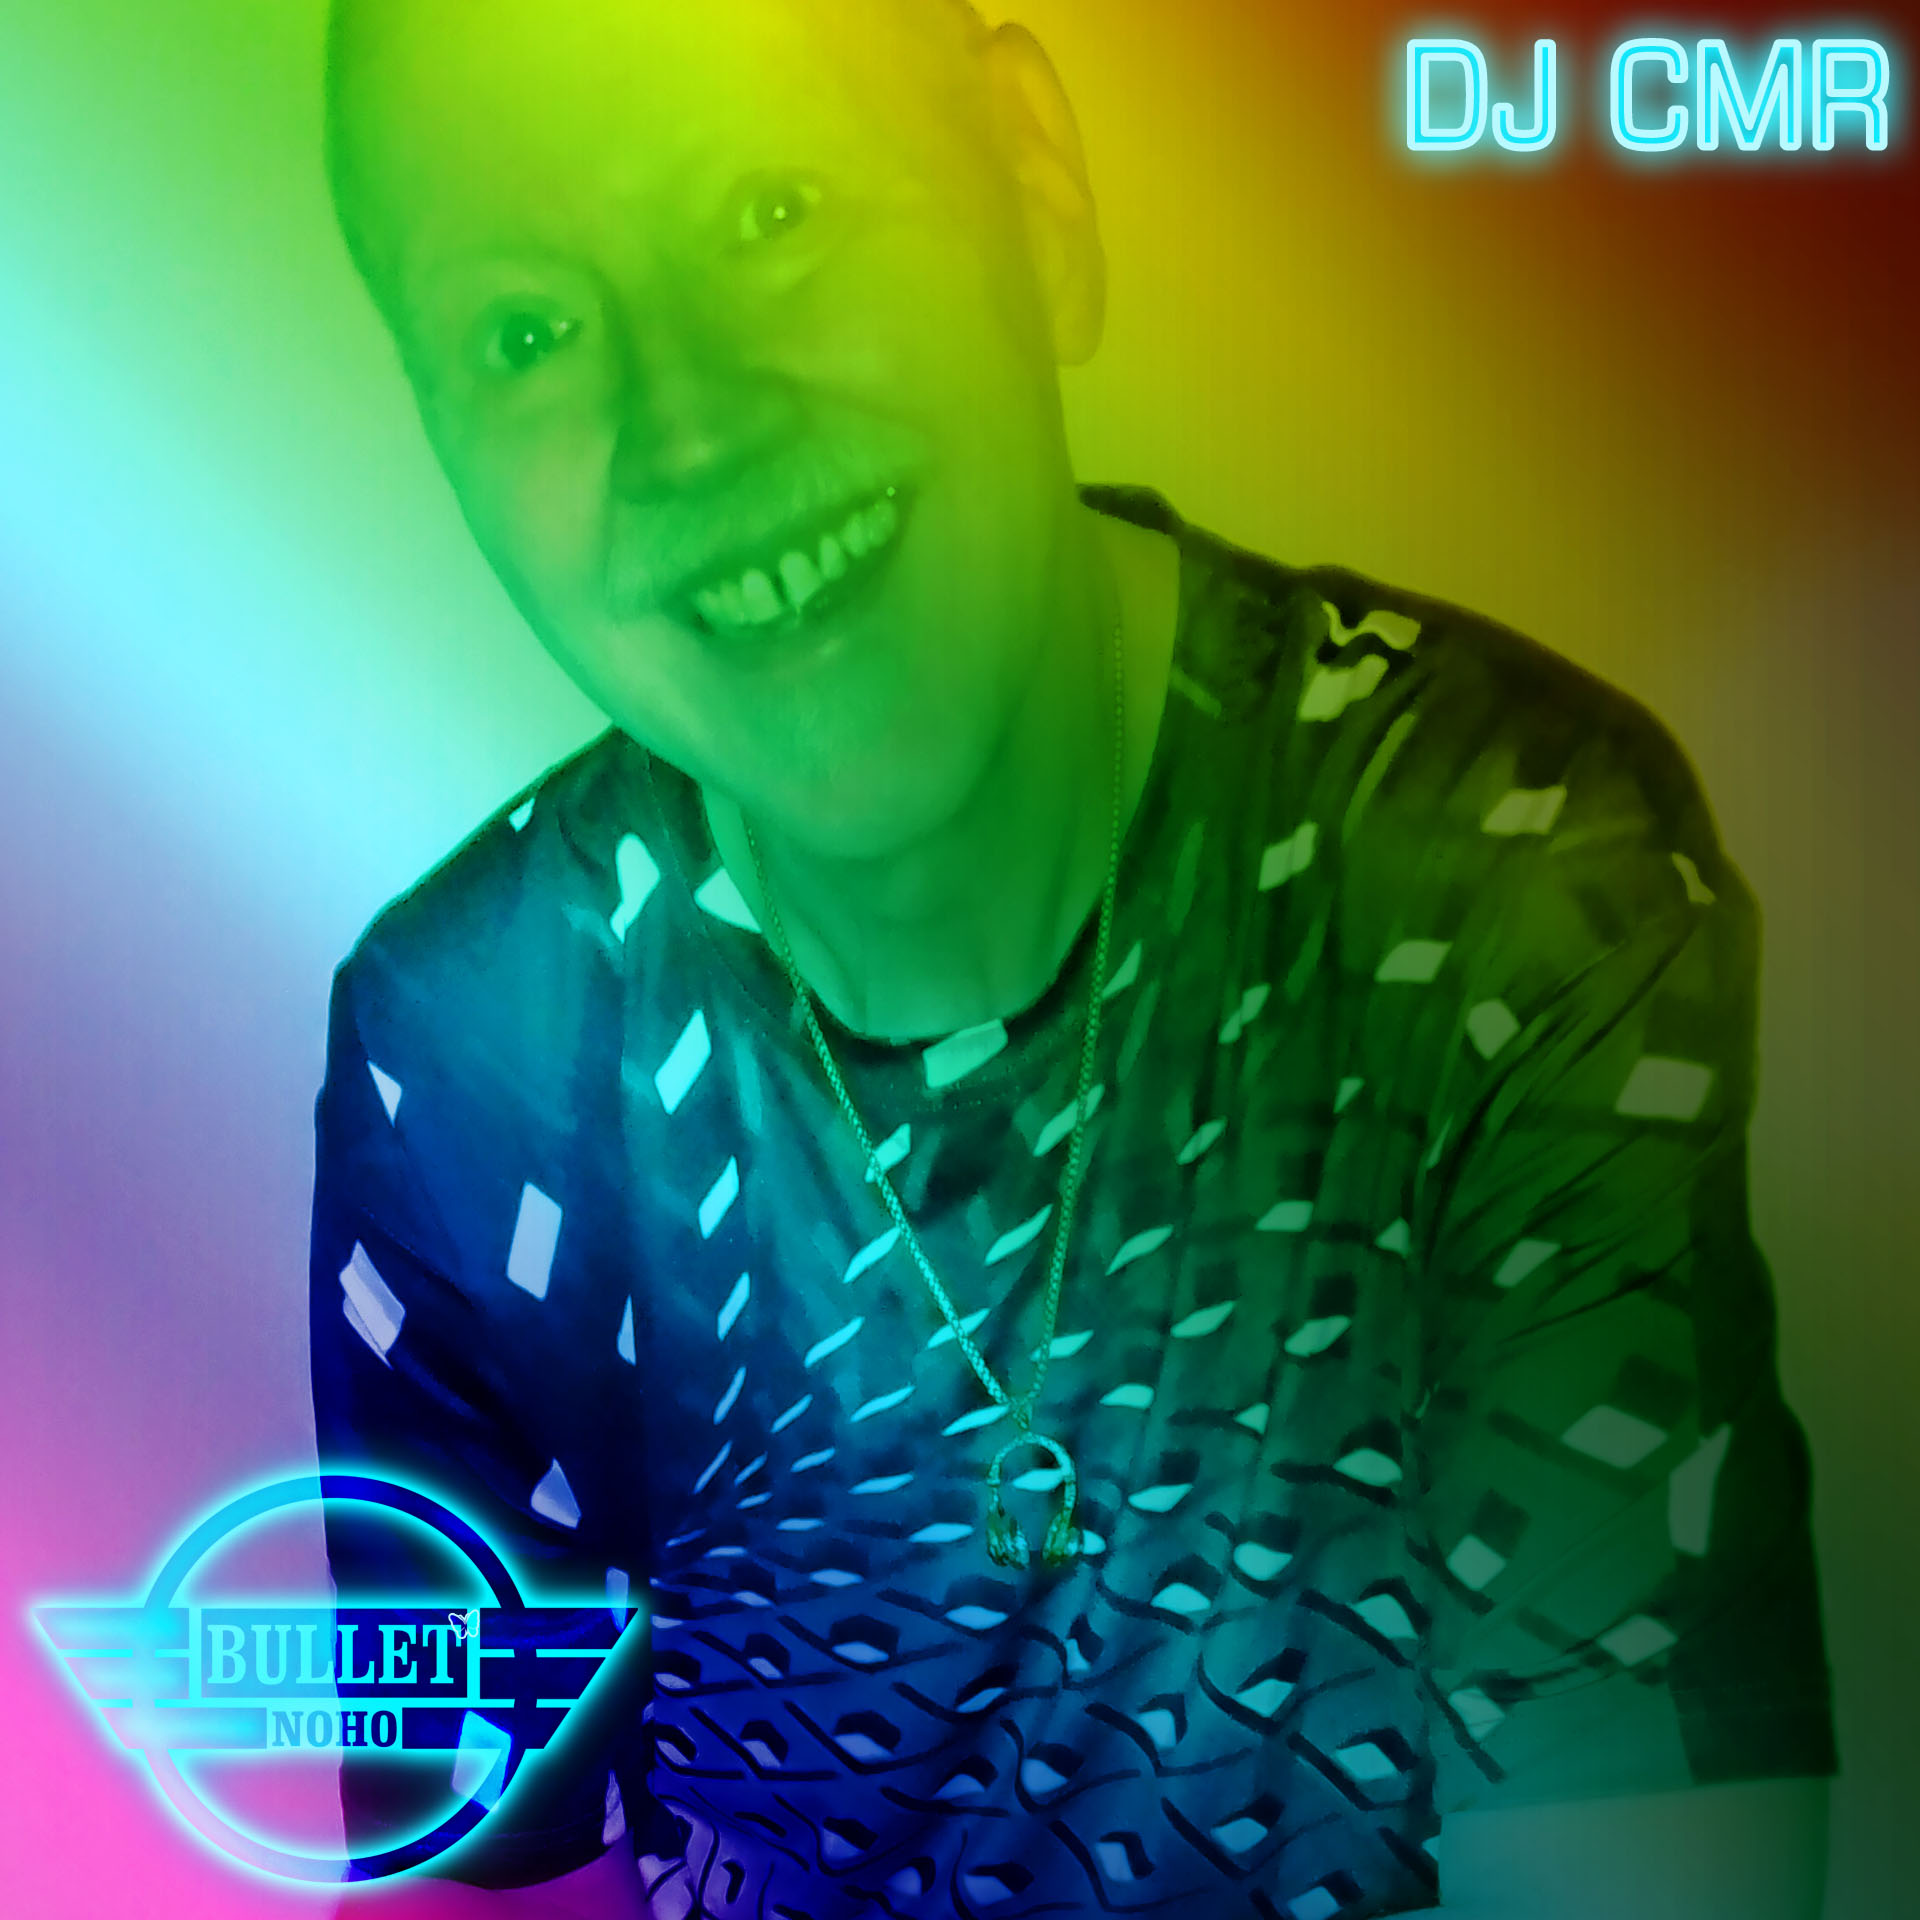 DJ CMR: Friday, 04/12/24 from 8:00 PM to 2:00 AM